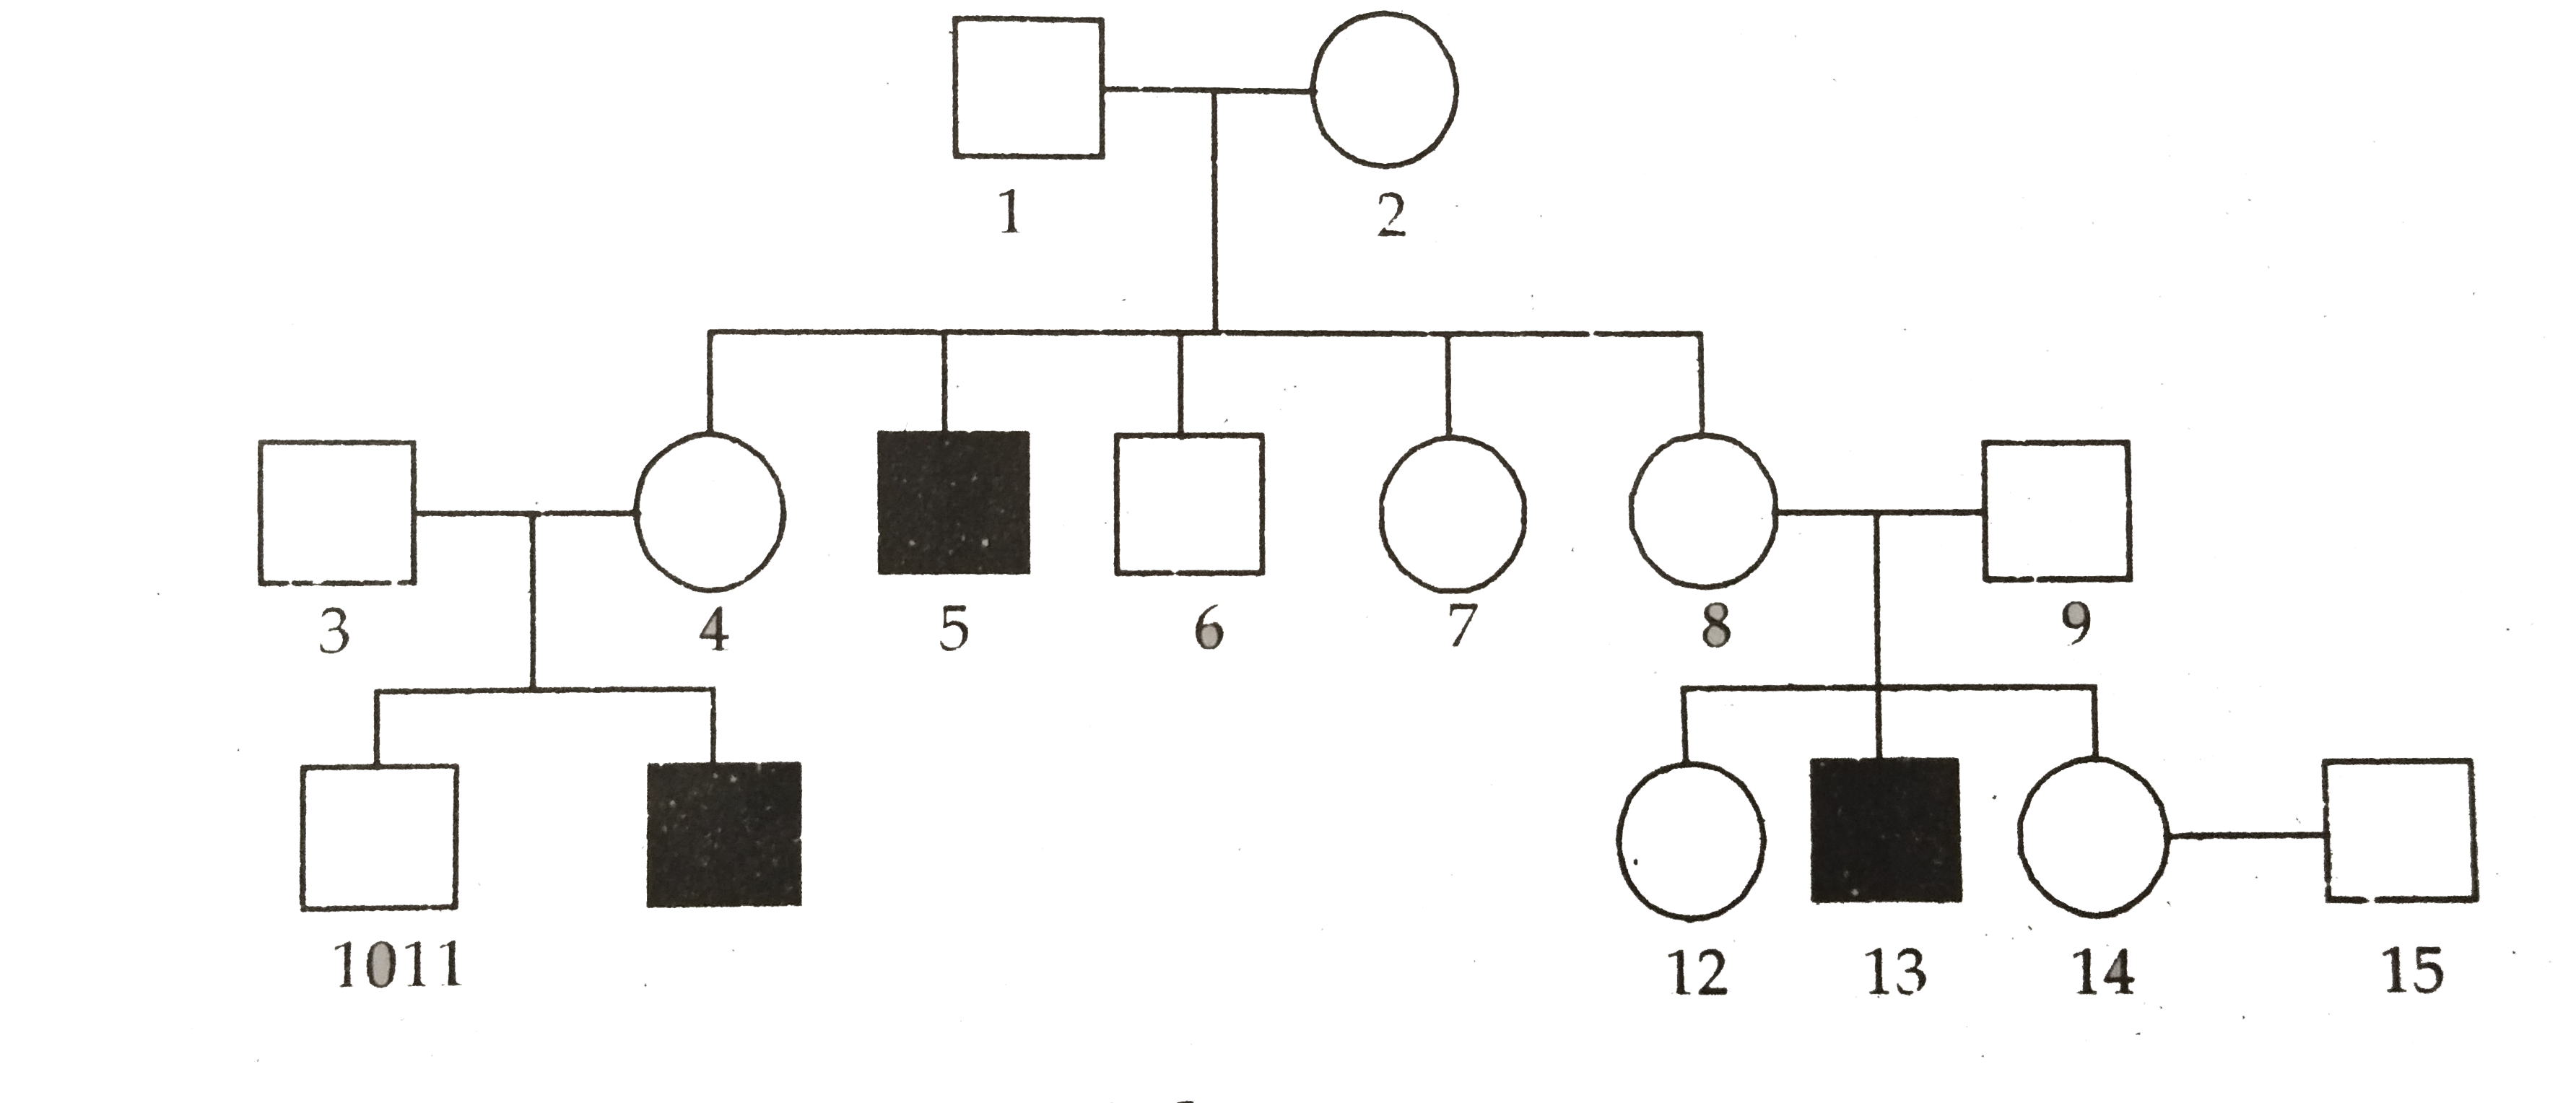 Haemophilia is a sex linked recessive disorder of humans. The pedigree chart given below shows the inheritance of haemophilia in one family. Study the pattern of inheritance and answer the questions given       Give all the possible genotypes of the members 4,5 and 6 in the pedigree chart.   (b) A blood test shows that the individual 14 is a carrier of haemophilia. The member numbered 15 has recently married the member numbered 14. What is the probability that their first child will be a haemophilic male?   A cross between the two results